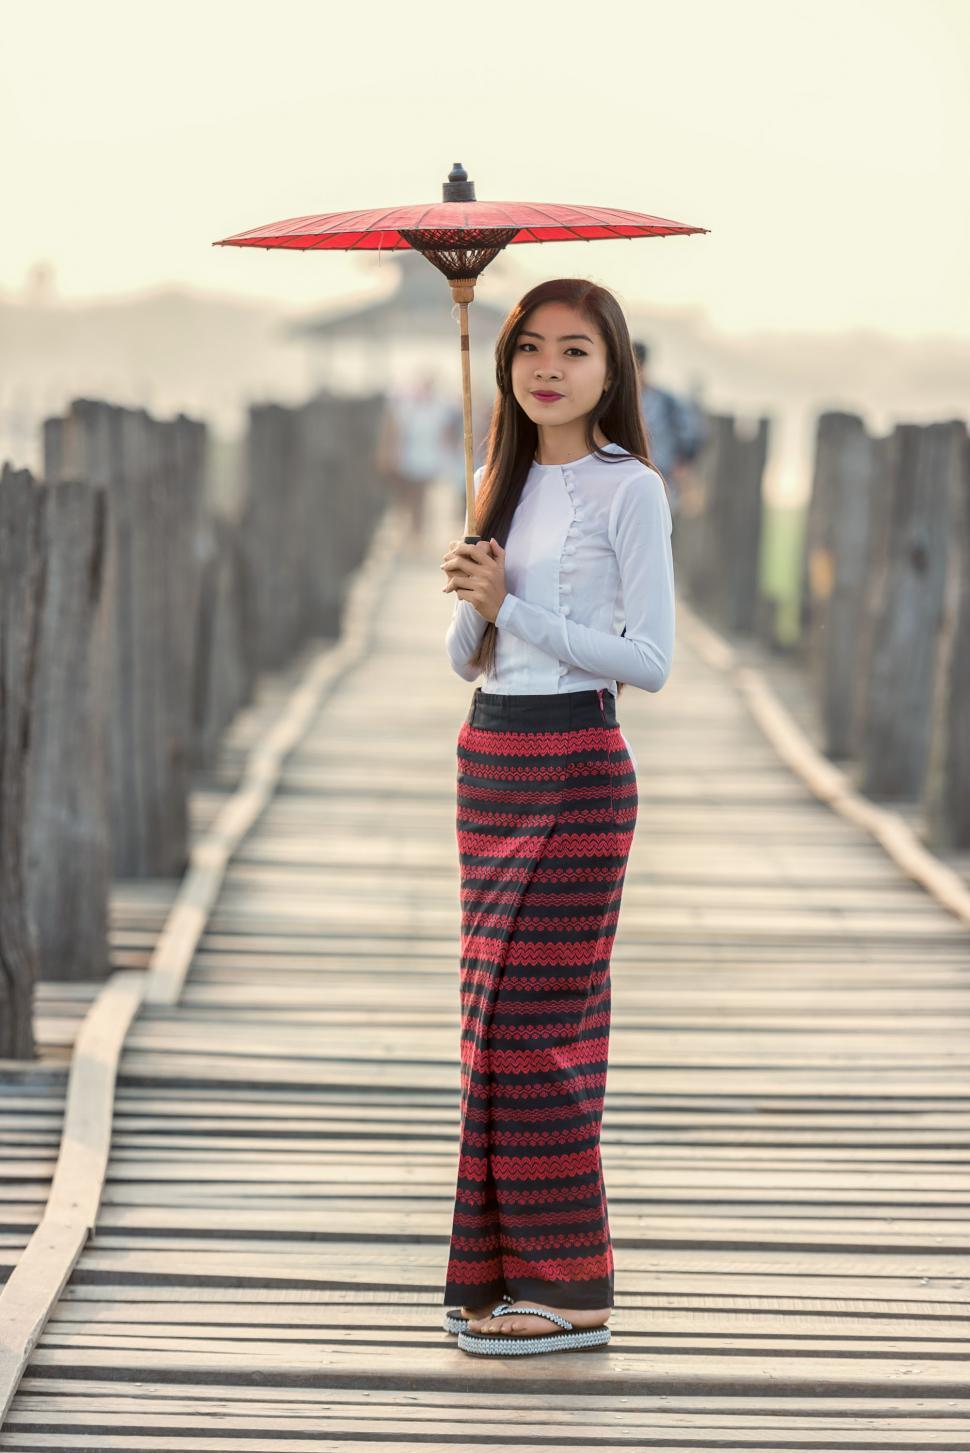 Free Image of Asian Girl with Umbrella 